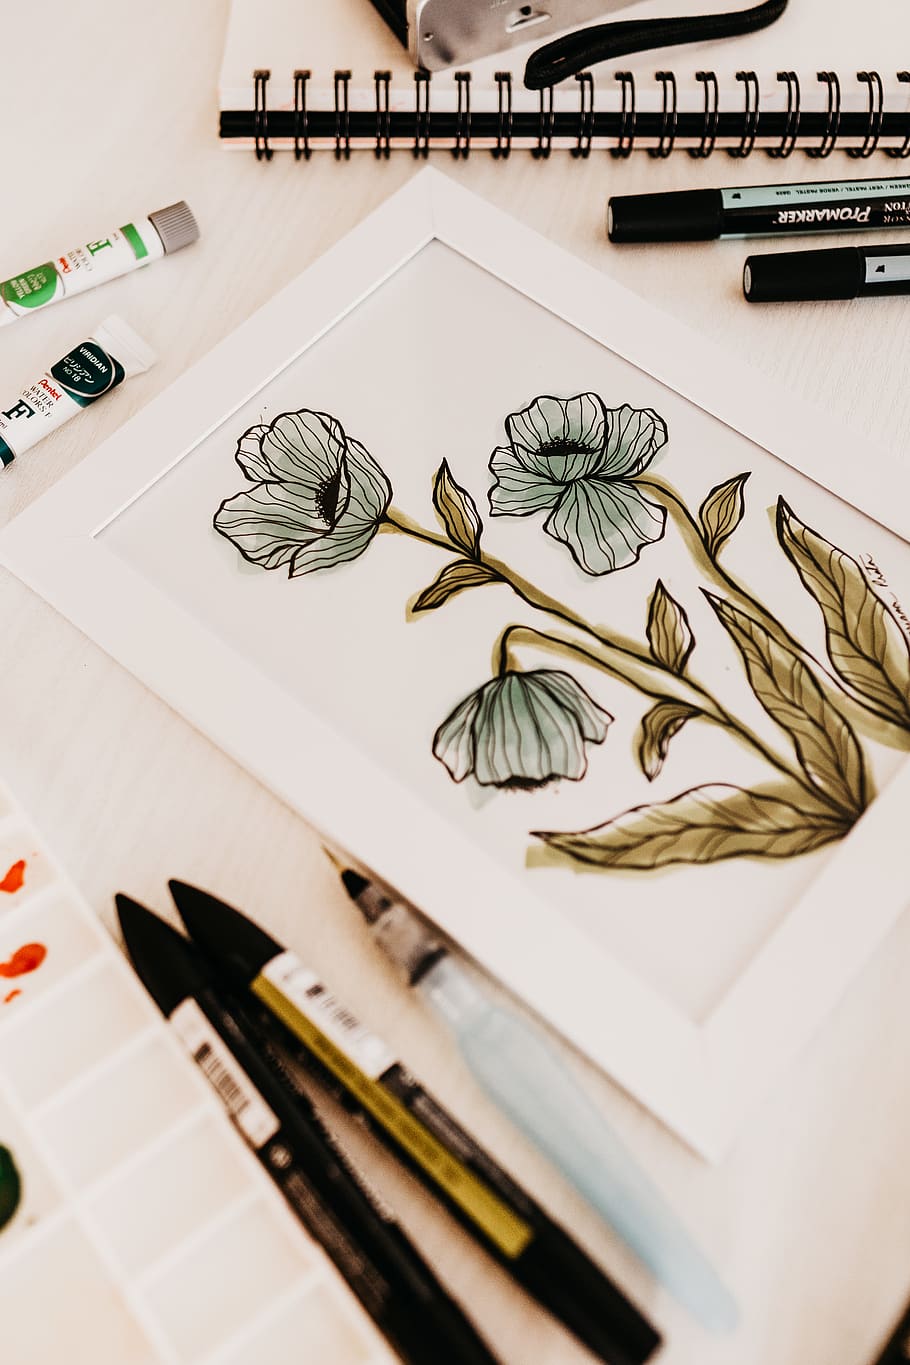 How to draw Flower sketch using pen  Easy drawing for beginners  YouTube